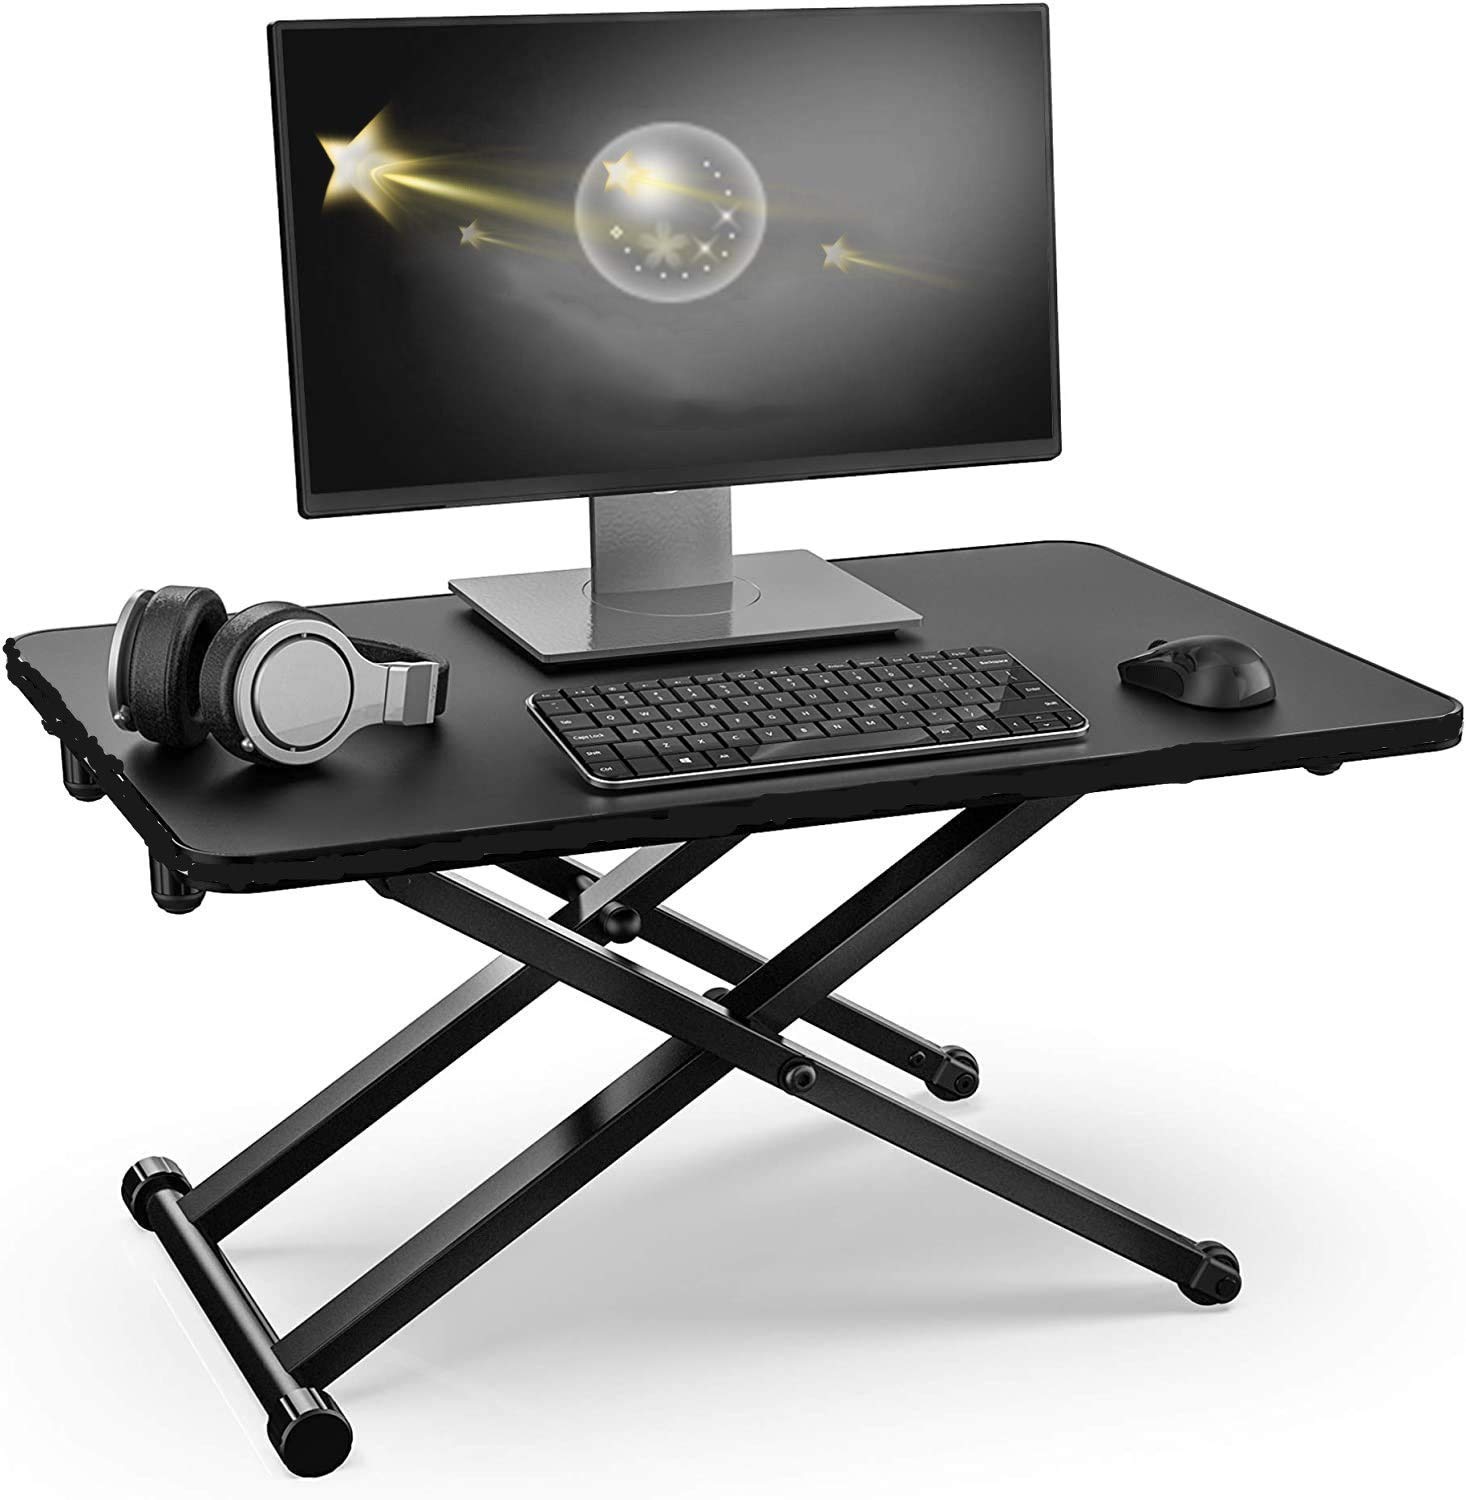 Adjustable Height Stand Steady Standing&Sitting Gas Spring Riser Desk Converter w Keyboard Mat for Health Benefits and No Assembly Needed,Converts ...